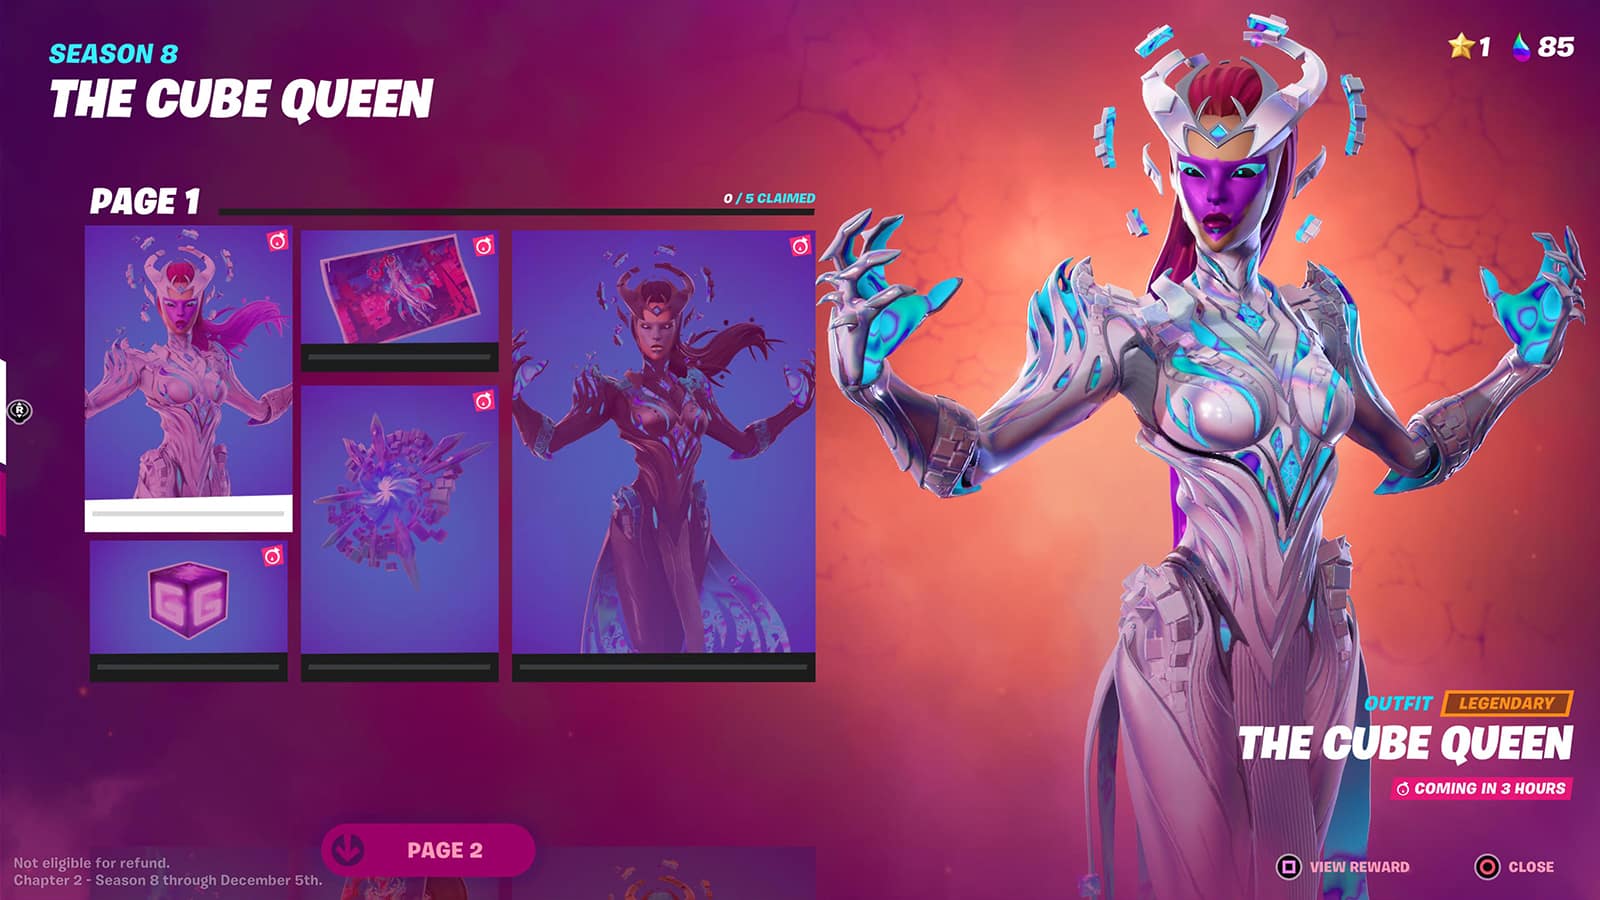 The Cube Queen cosmetics rewards page in Fortnite